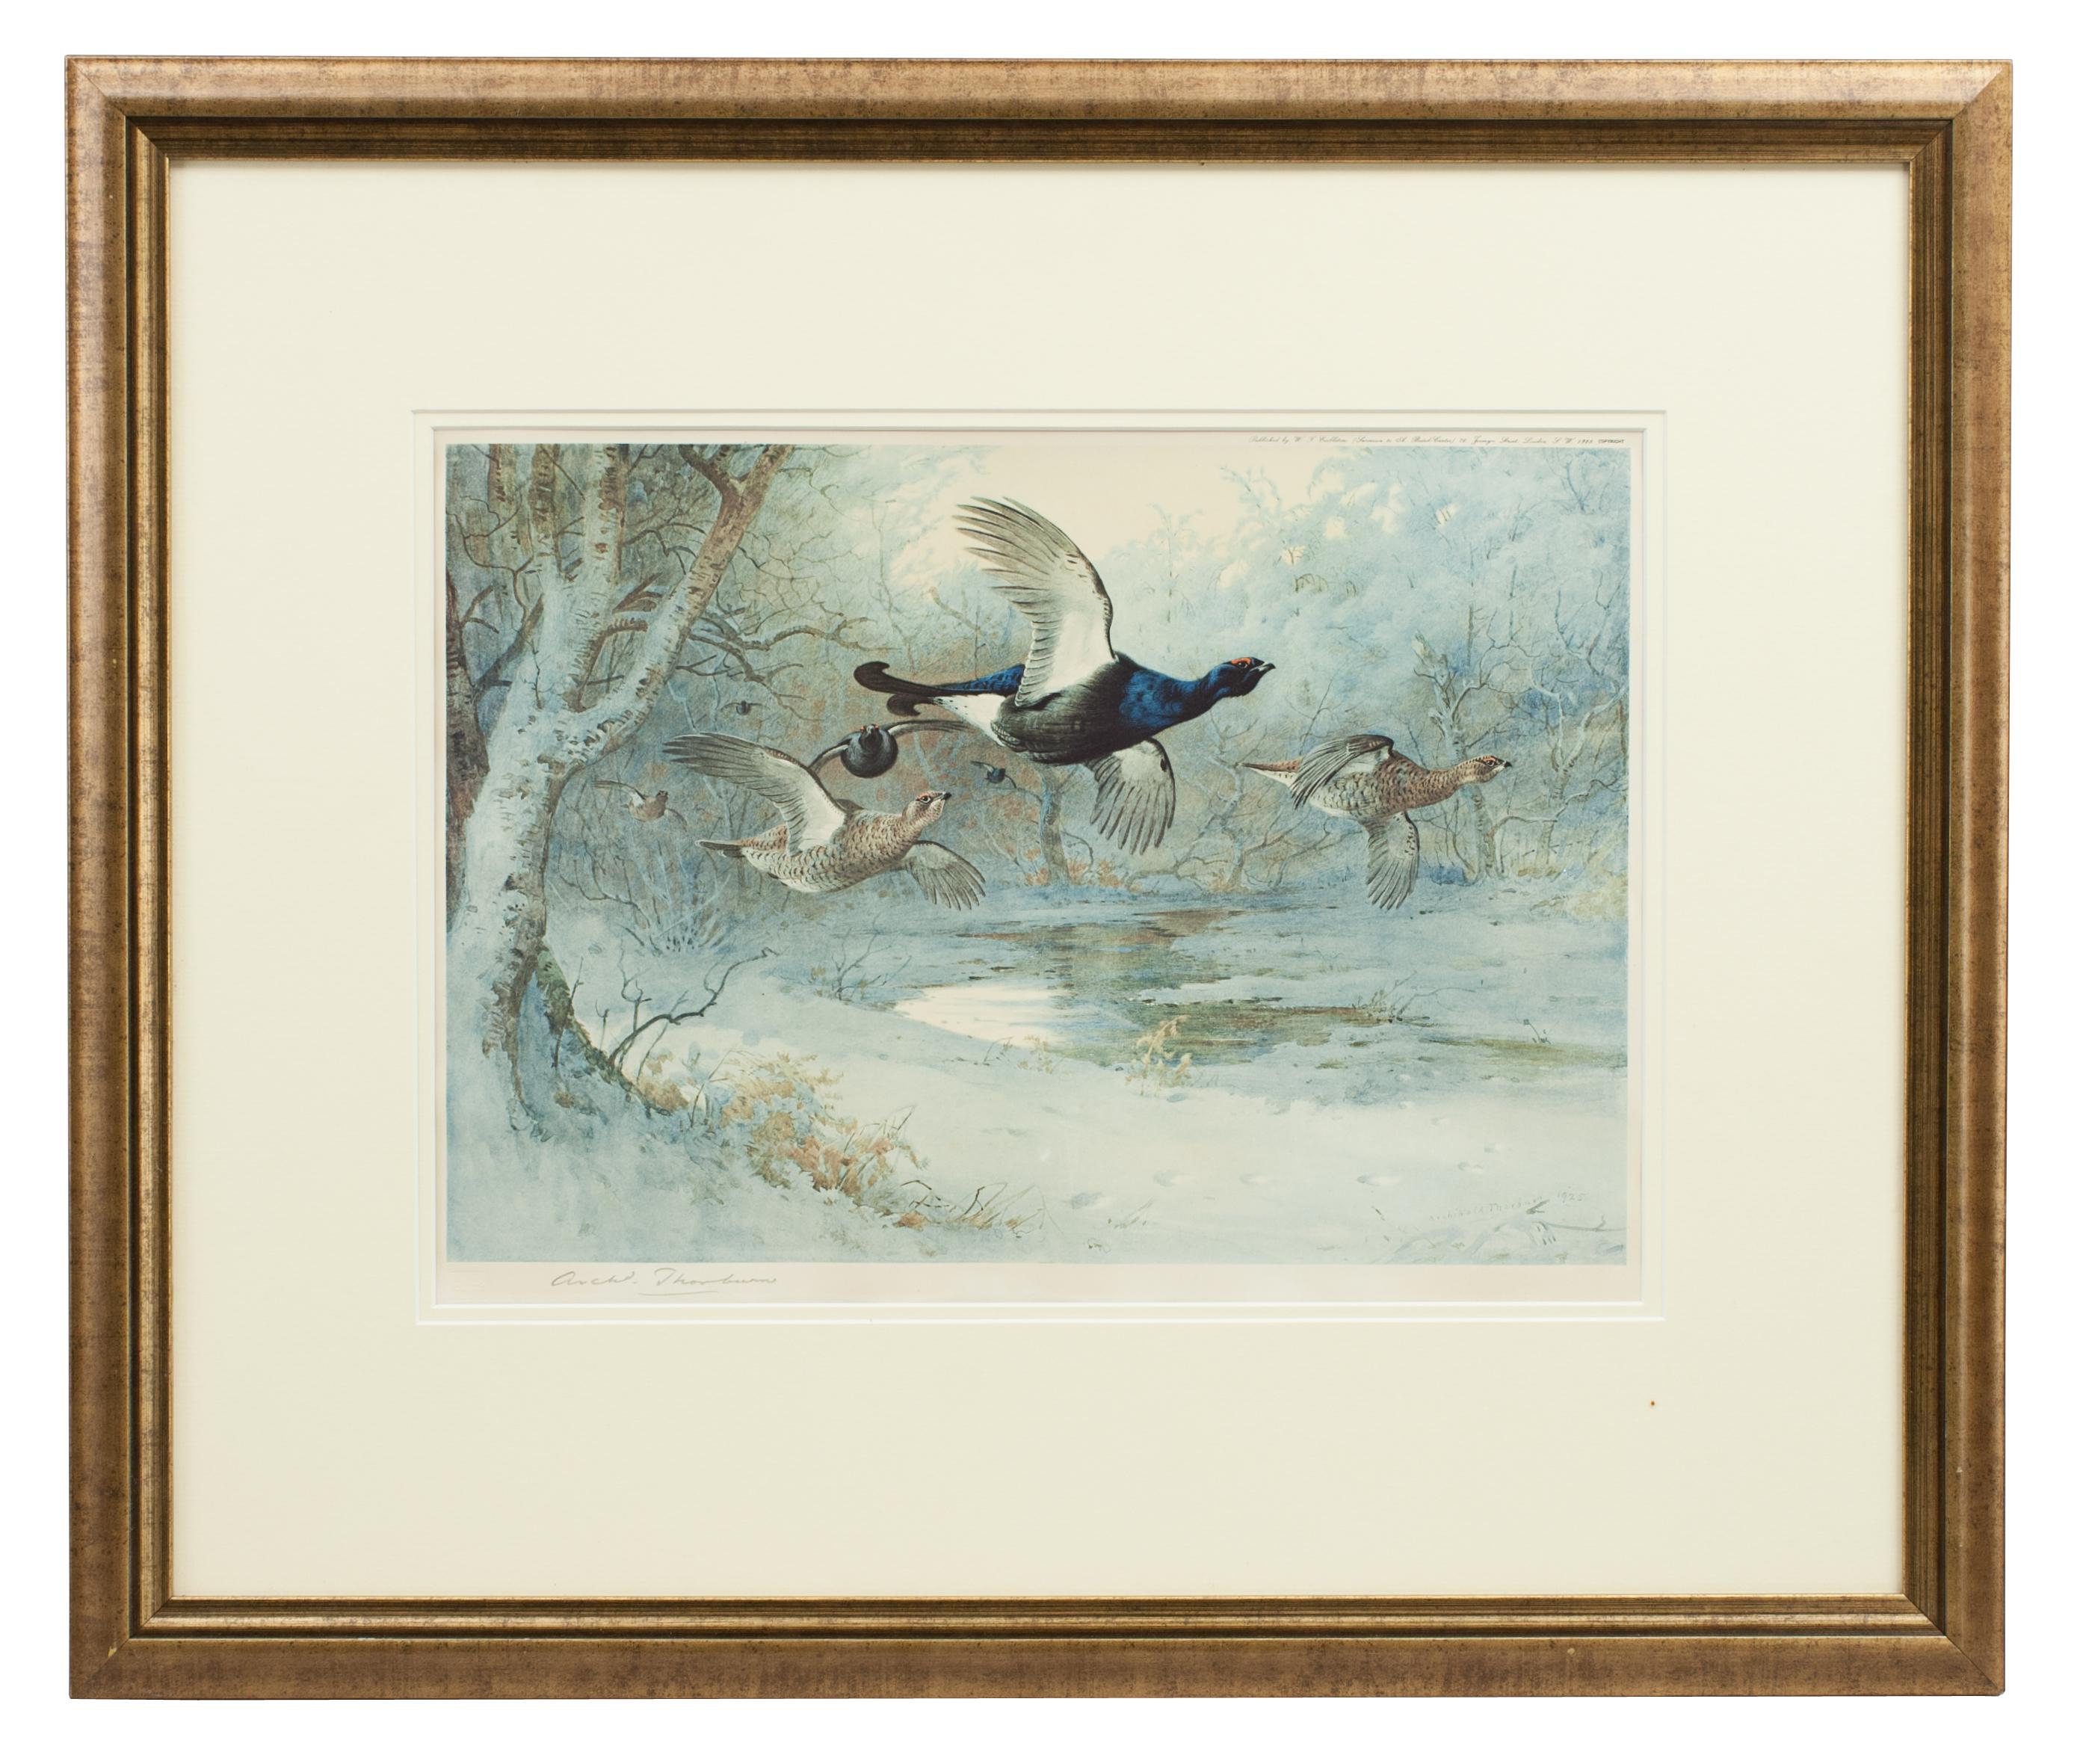 A game bird colotype print by Archibald Thorburn, titled 'Winter'. This is a single picture from a set of four called 'The Seasons'. Each season is represented by a bird, Partridge - Spring, pheasant - Autumn, Grouse - Summer, Black Game - Winter.